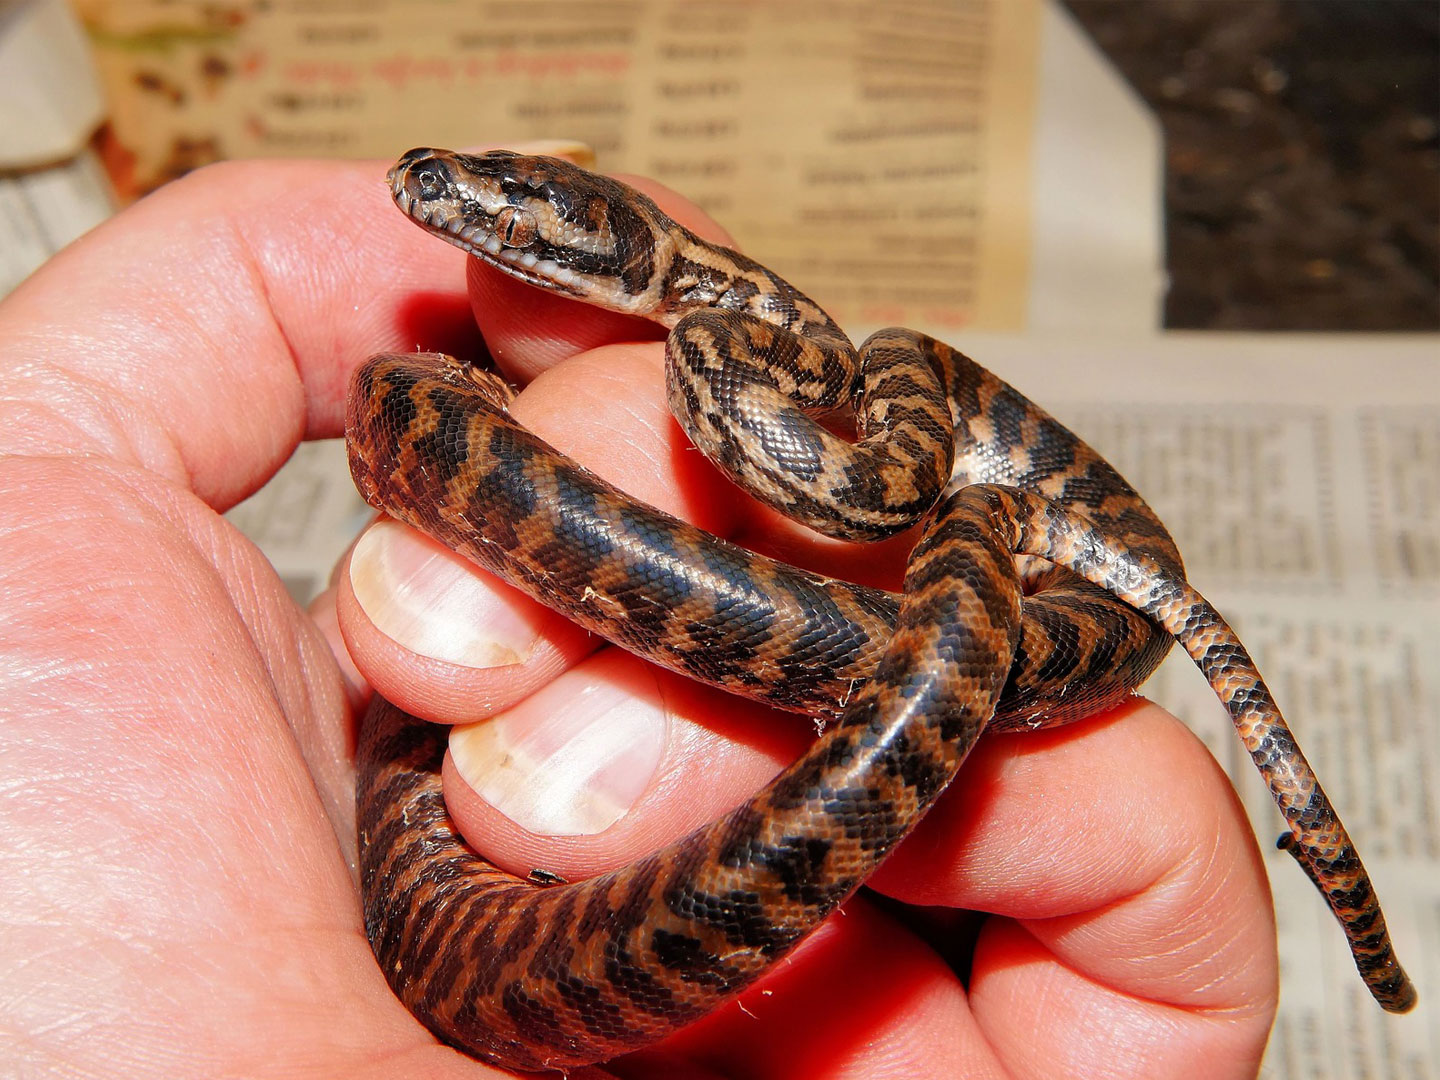 A snakelet coiled around a person's fingers